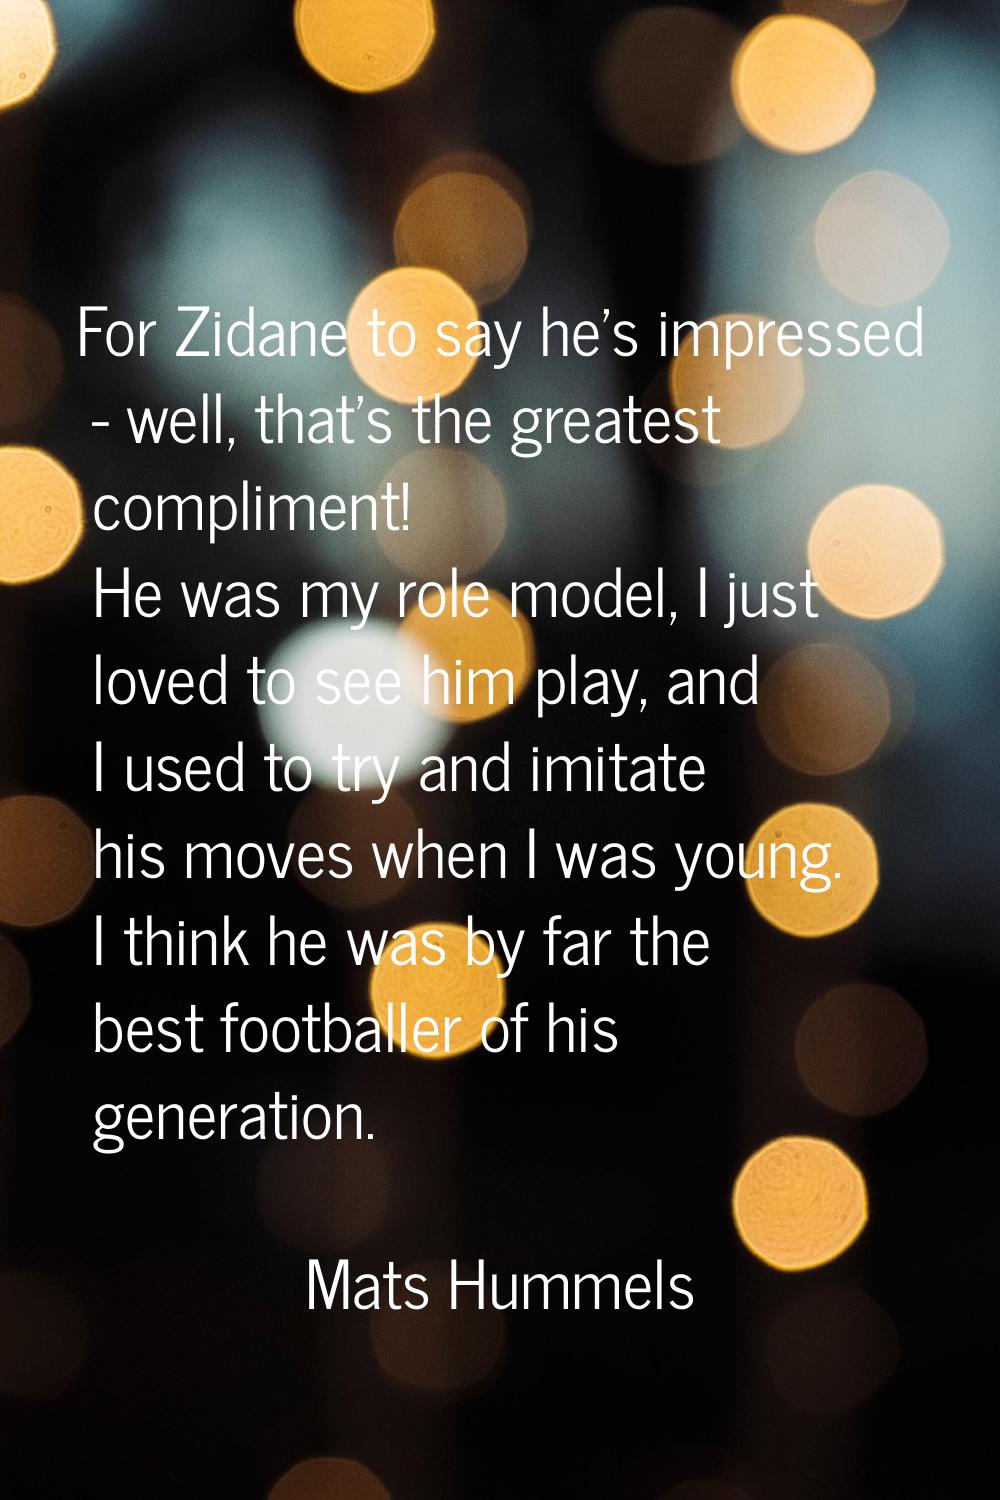 For Zidane to say he's impressed - well, that's the greatest compliment! He was my role model, I ju